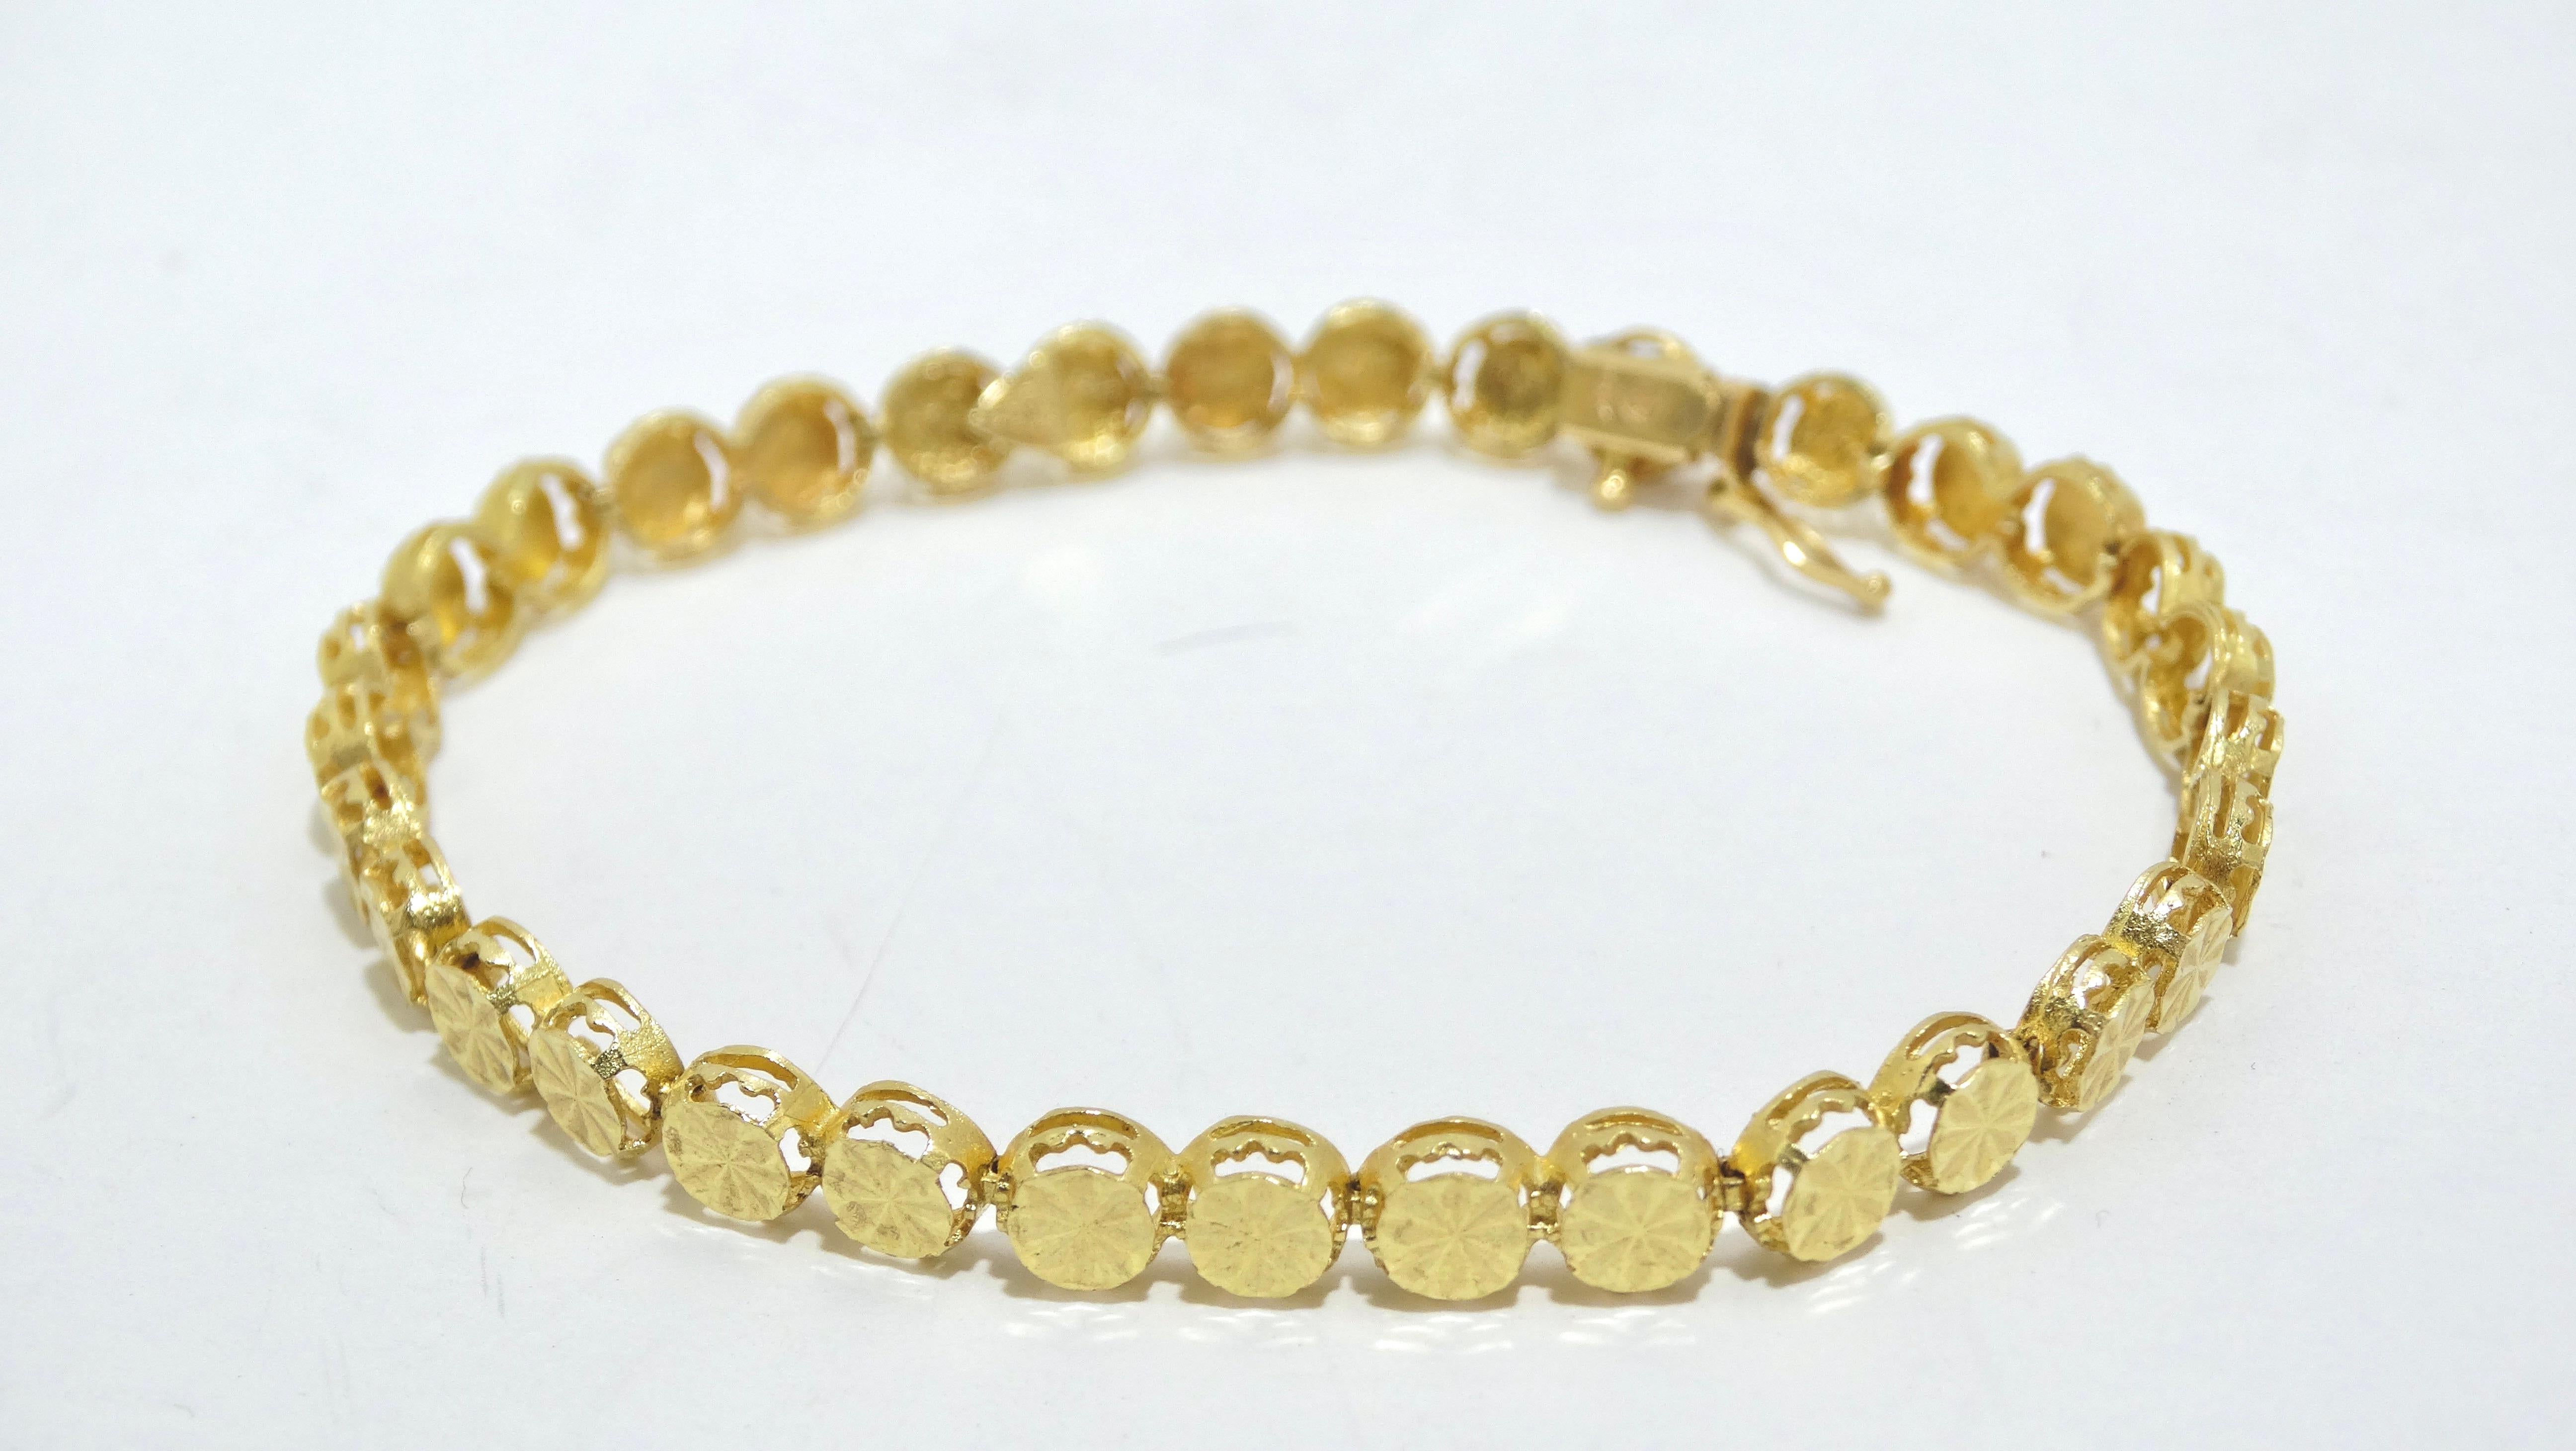 This is a vintage Beverly Hills 14k SOLID yellow Gold coin link tennis bracelet. This is a no-brainer to add to any jewelry collection. The simplicity and durability of this bracelet will take your through your everyday lifestyle. Wear with your